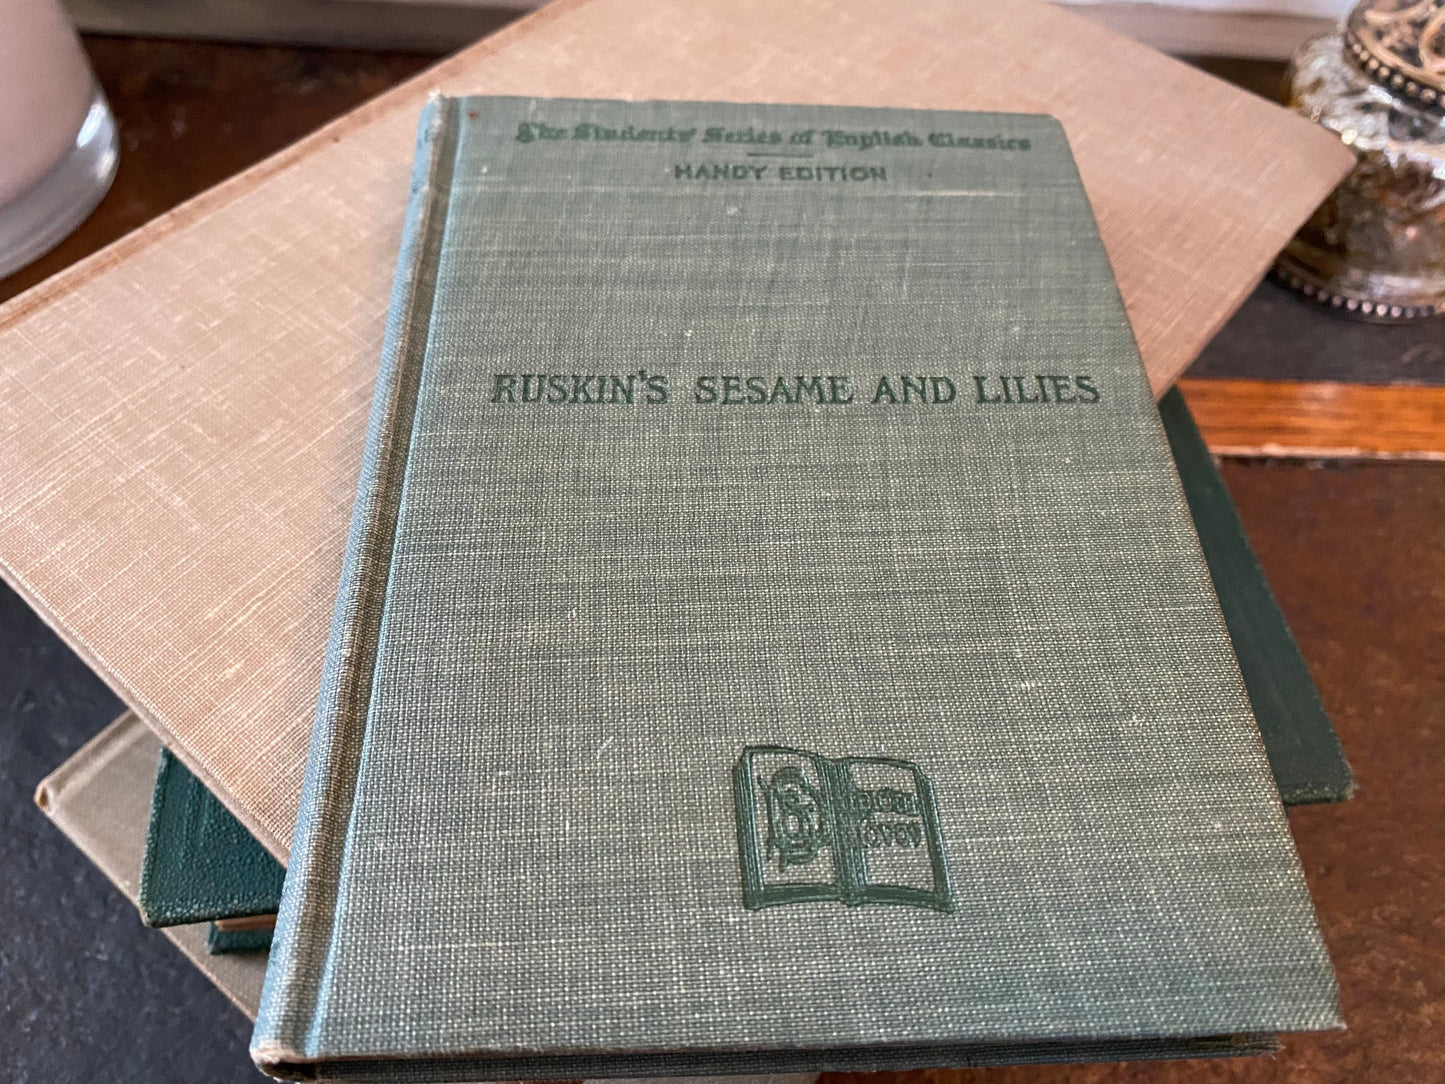 Ruskin’s Sesame and Lilies - Sibley and Ducker